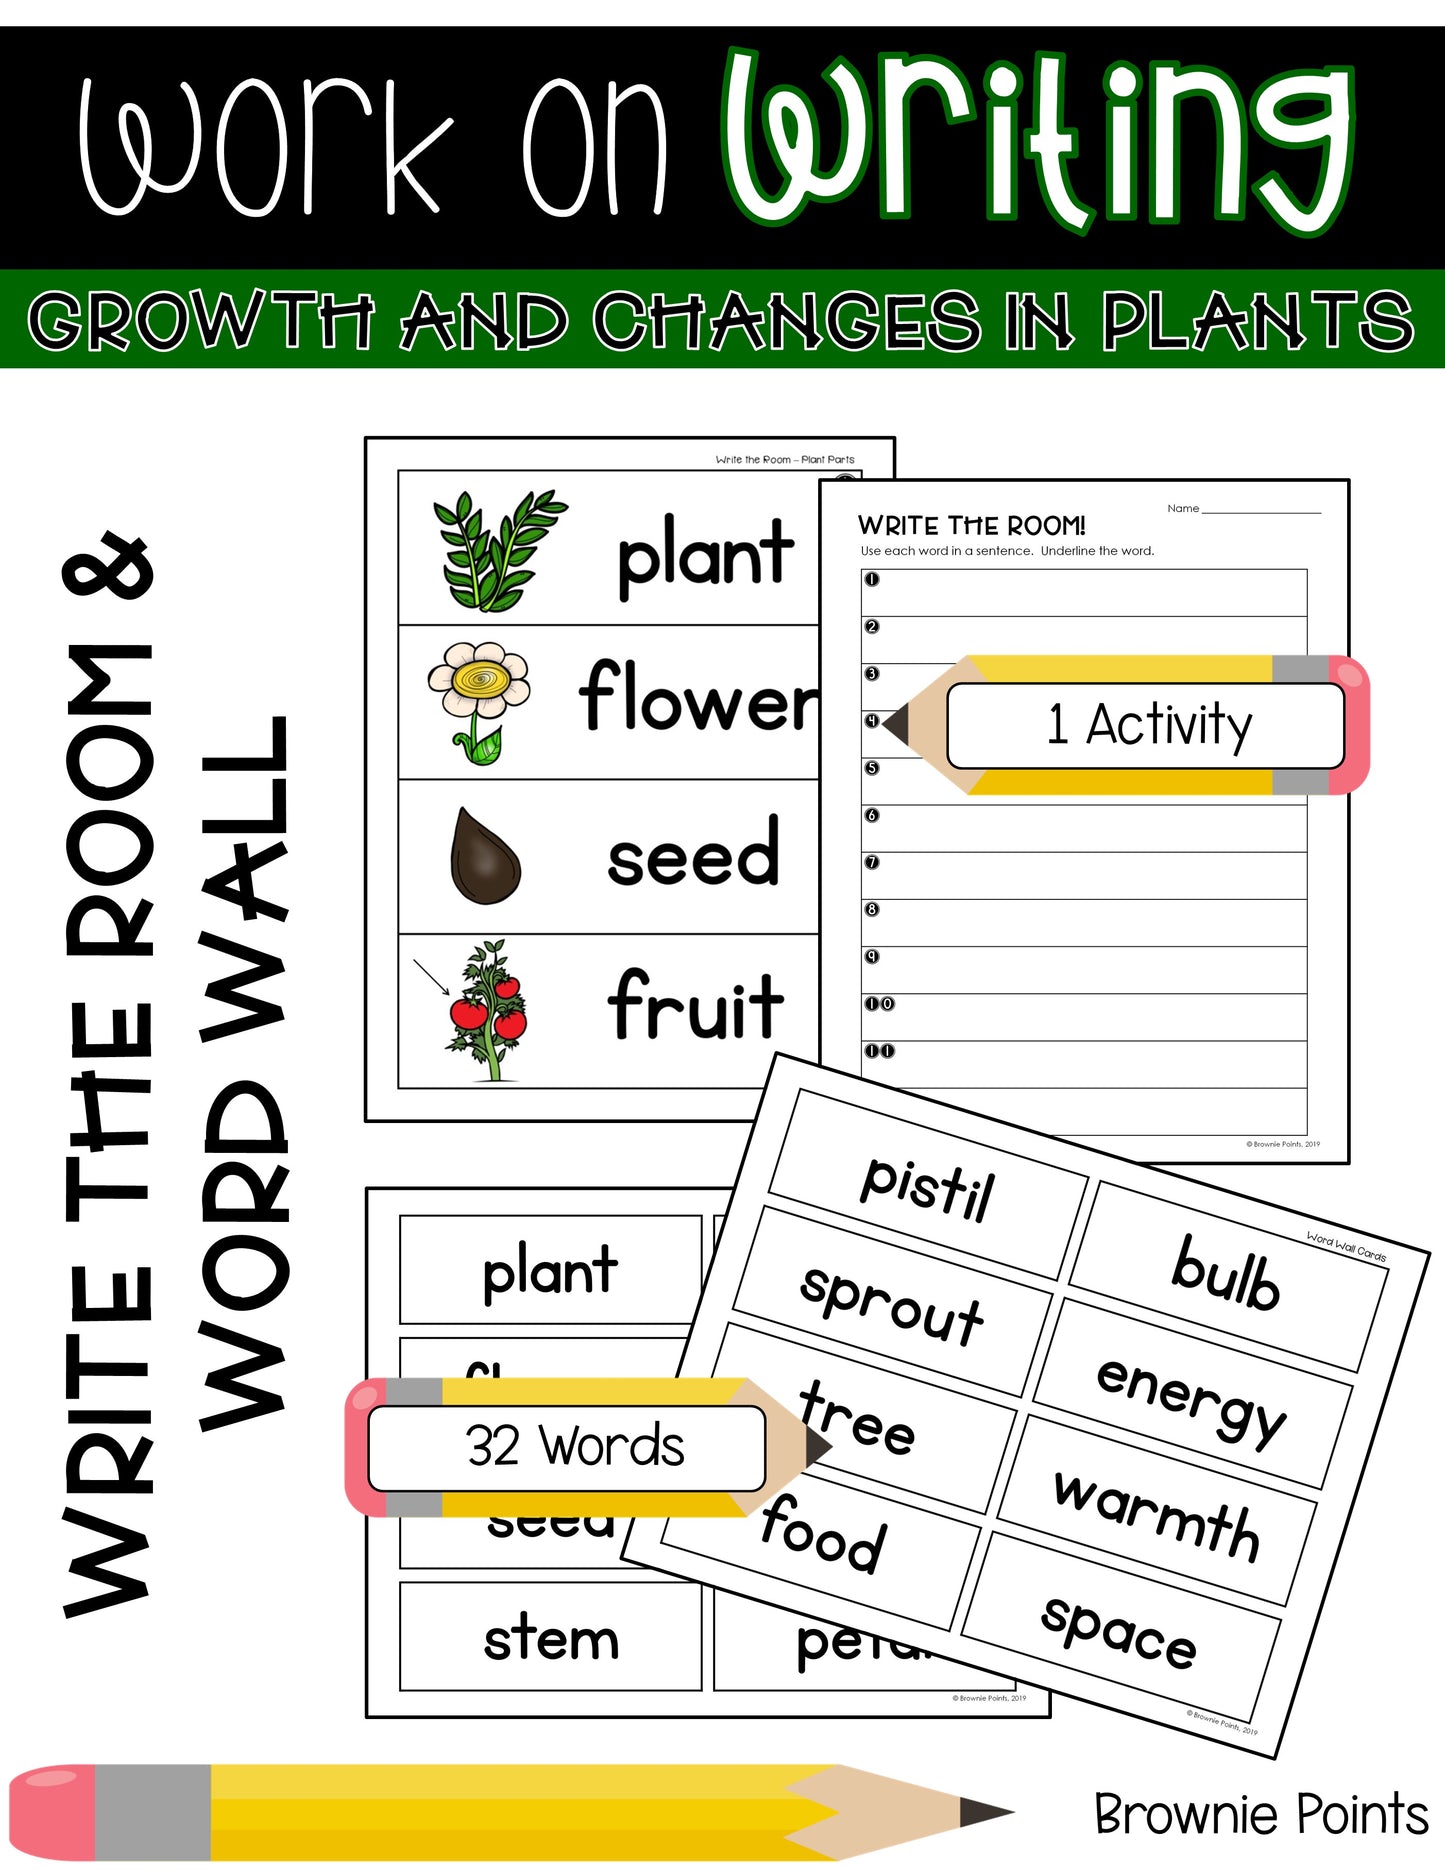 Work on Writing - Growth and Changes in Plants